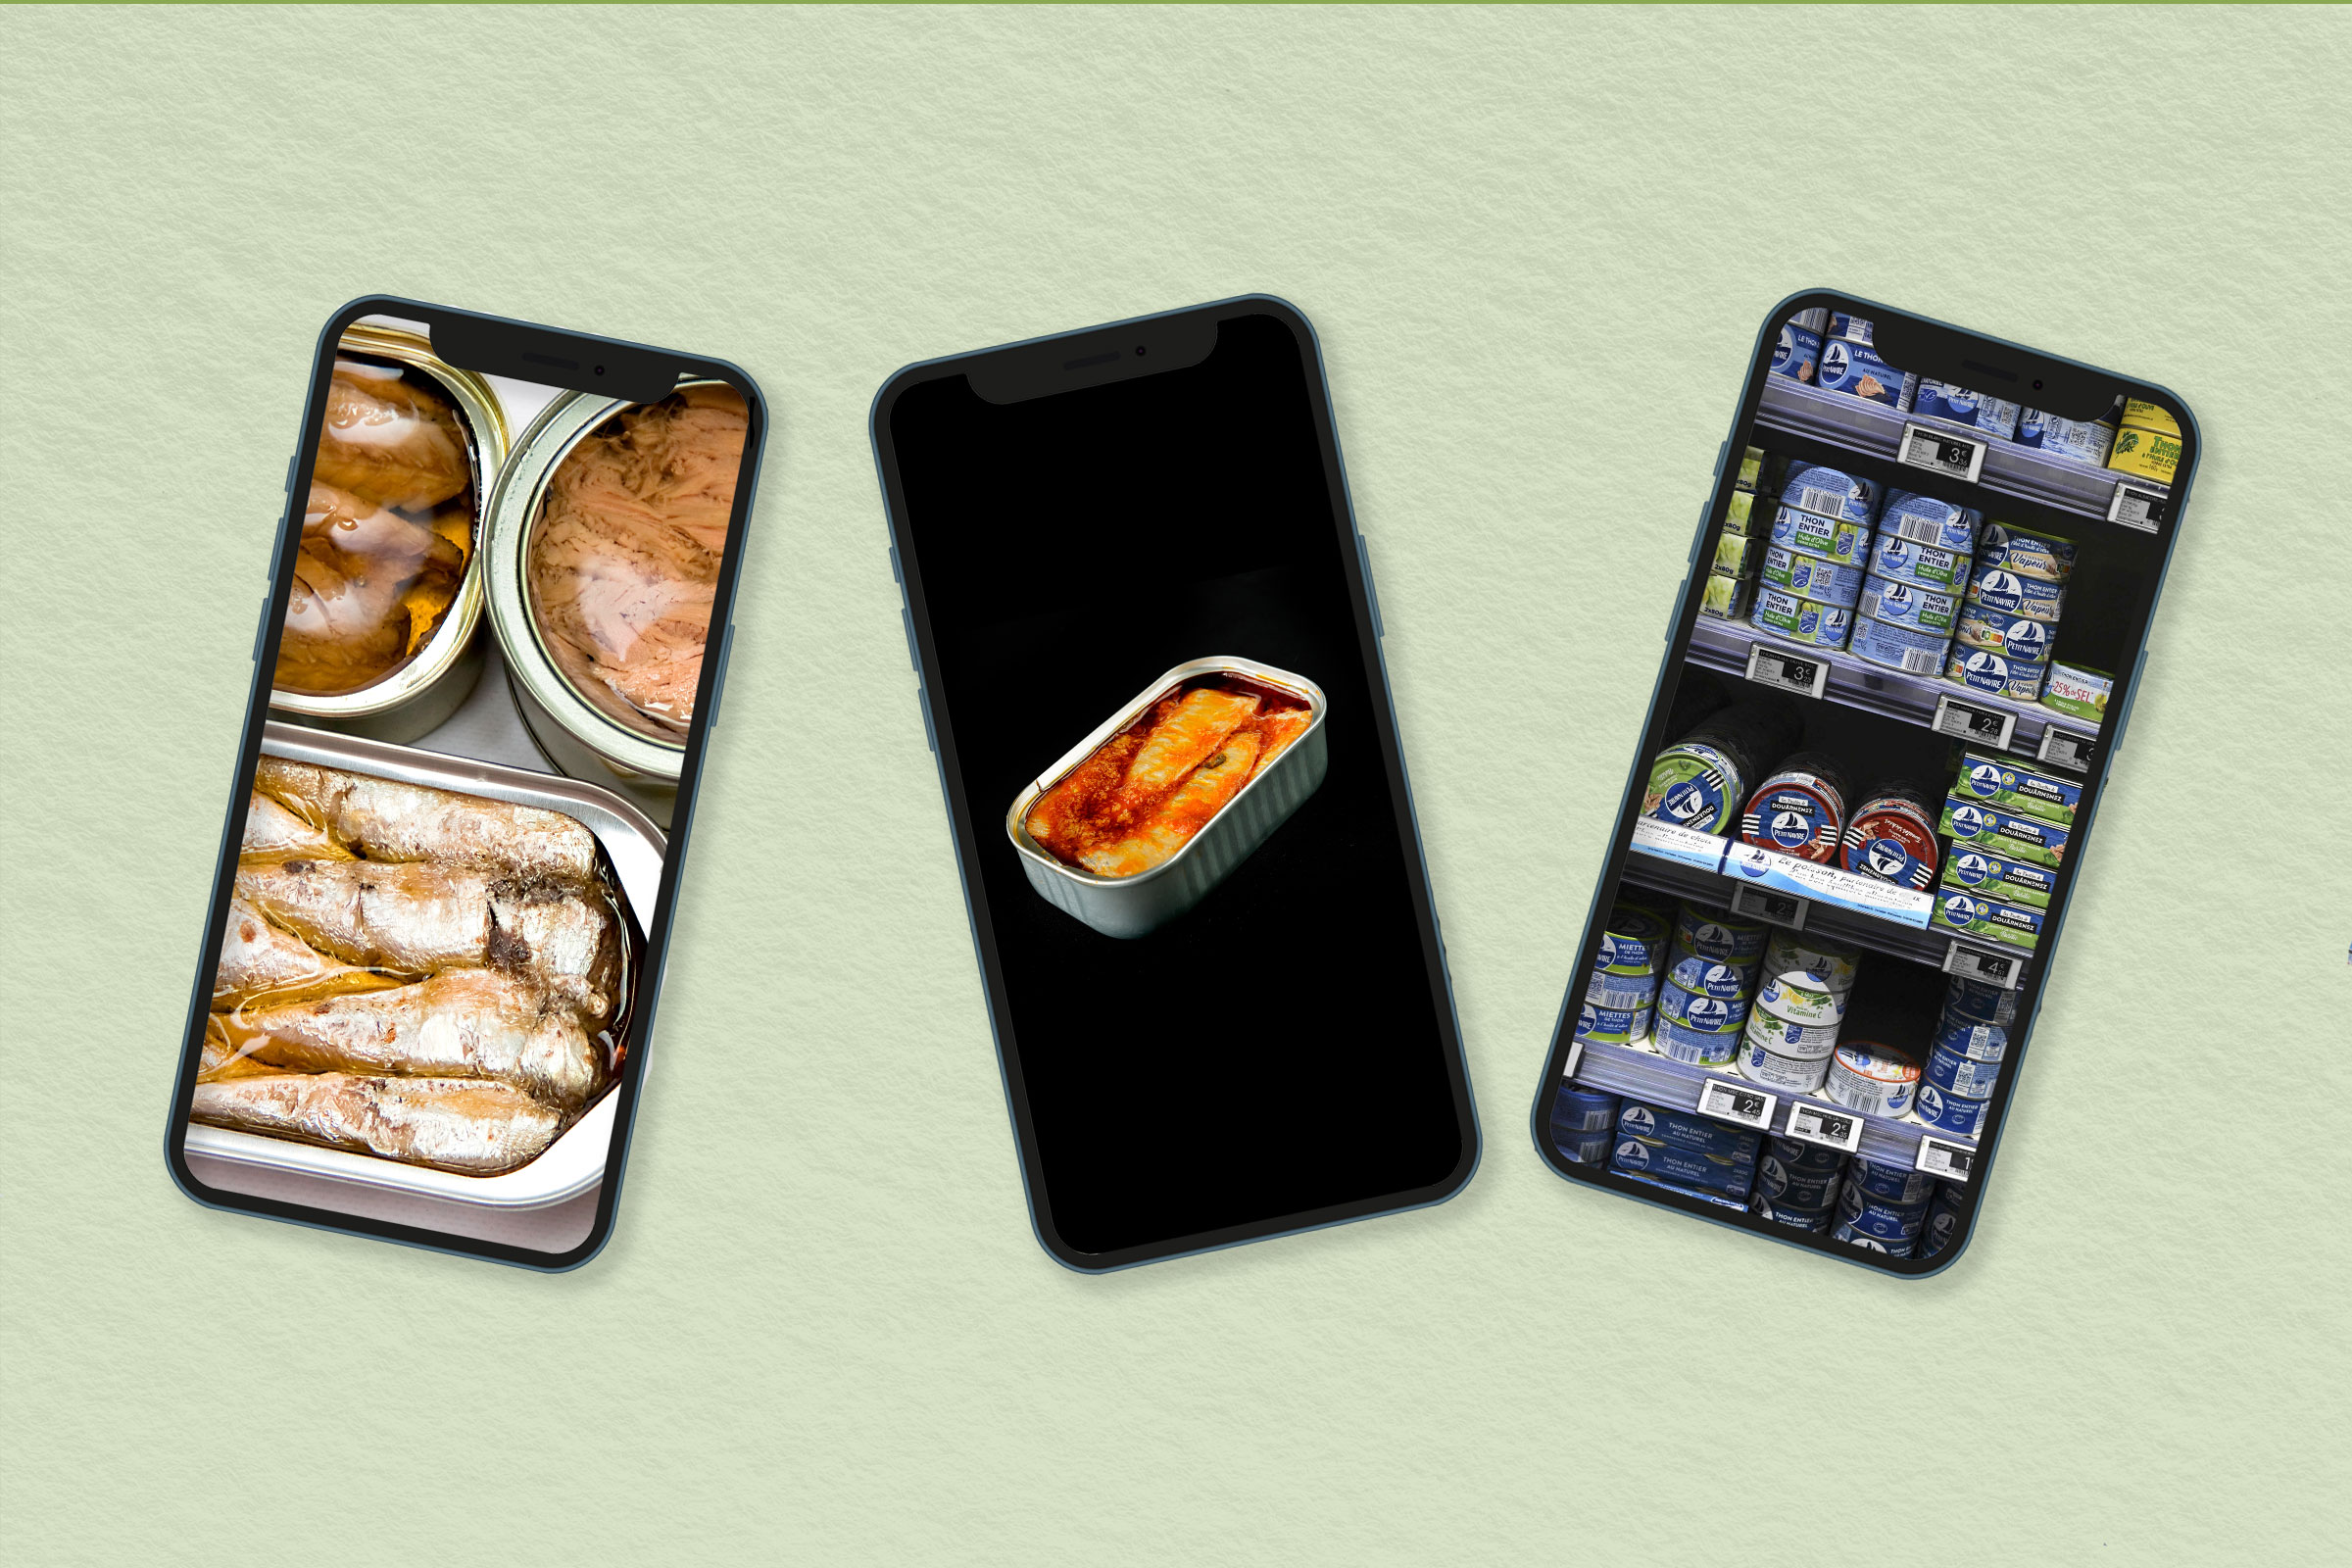 Three phones with photos of tinned fish on them